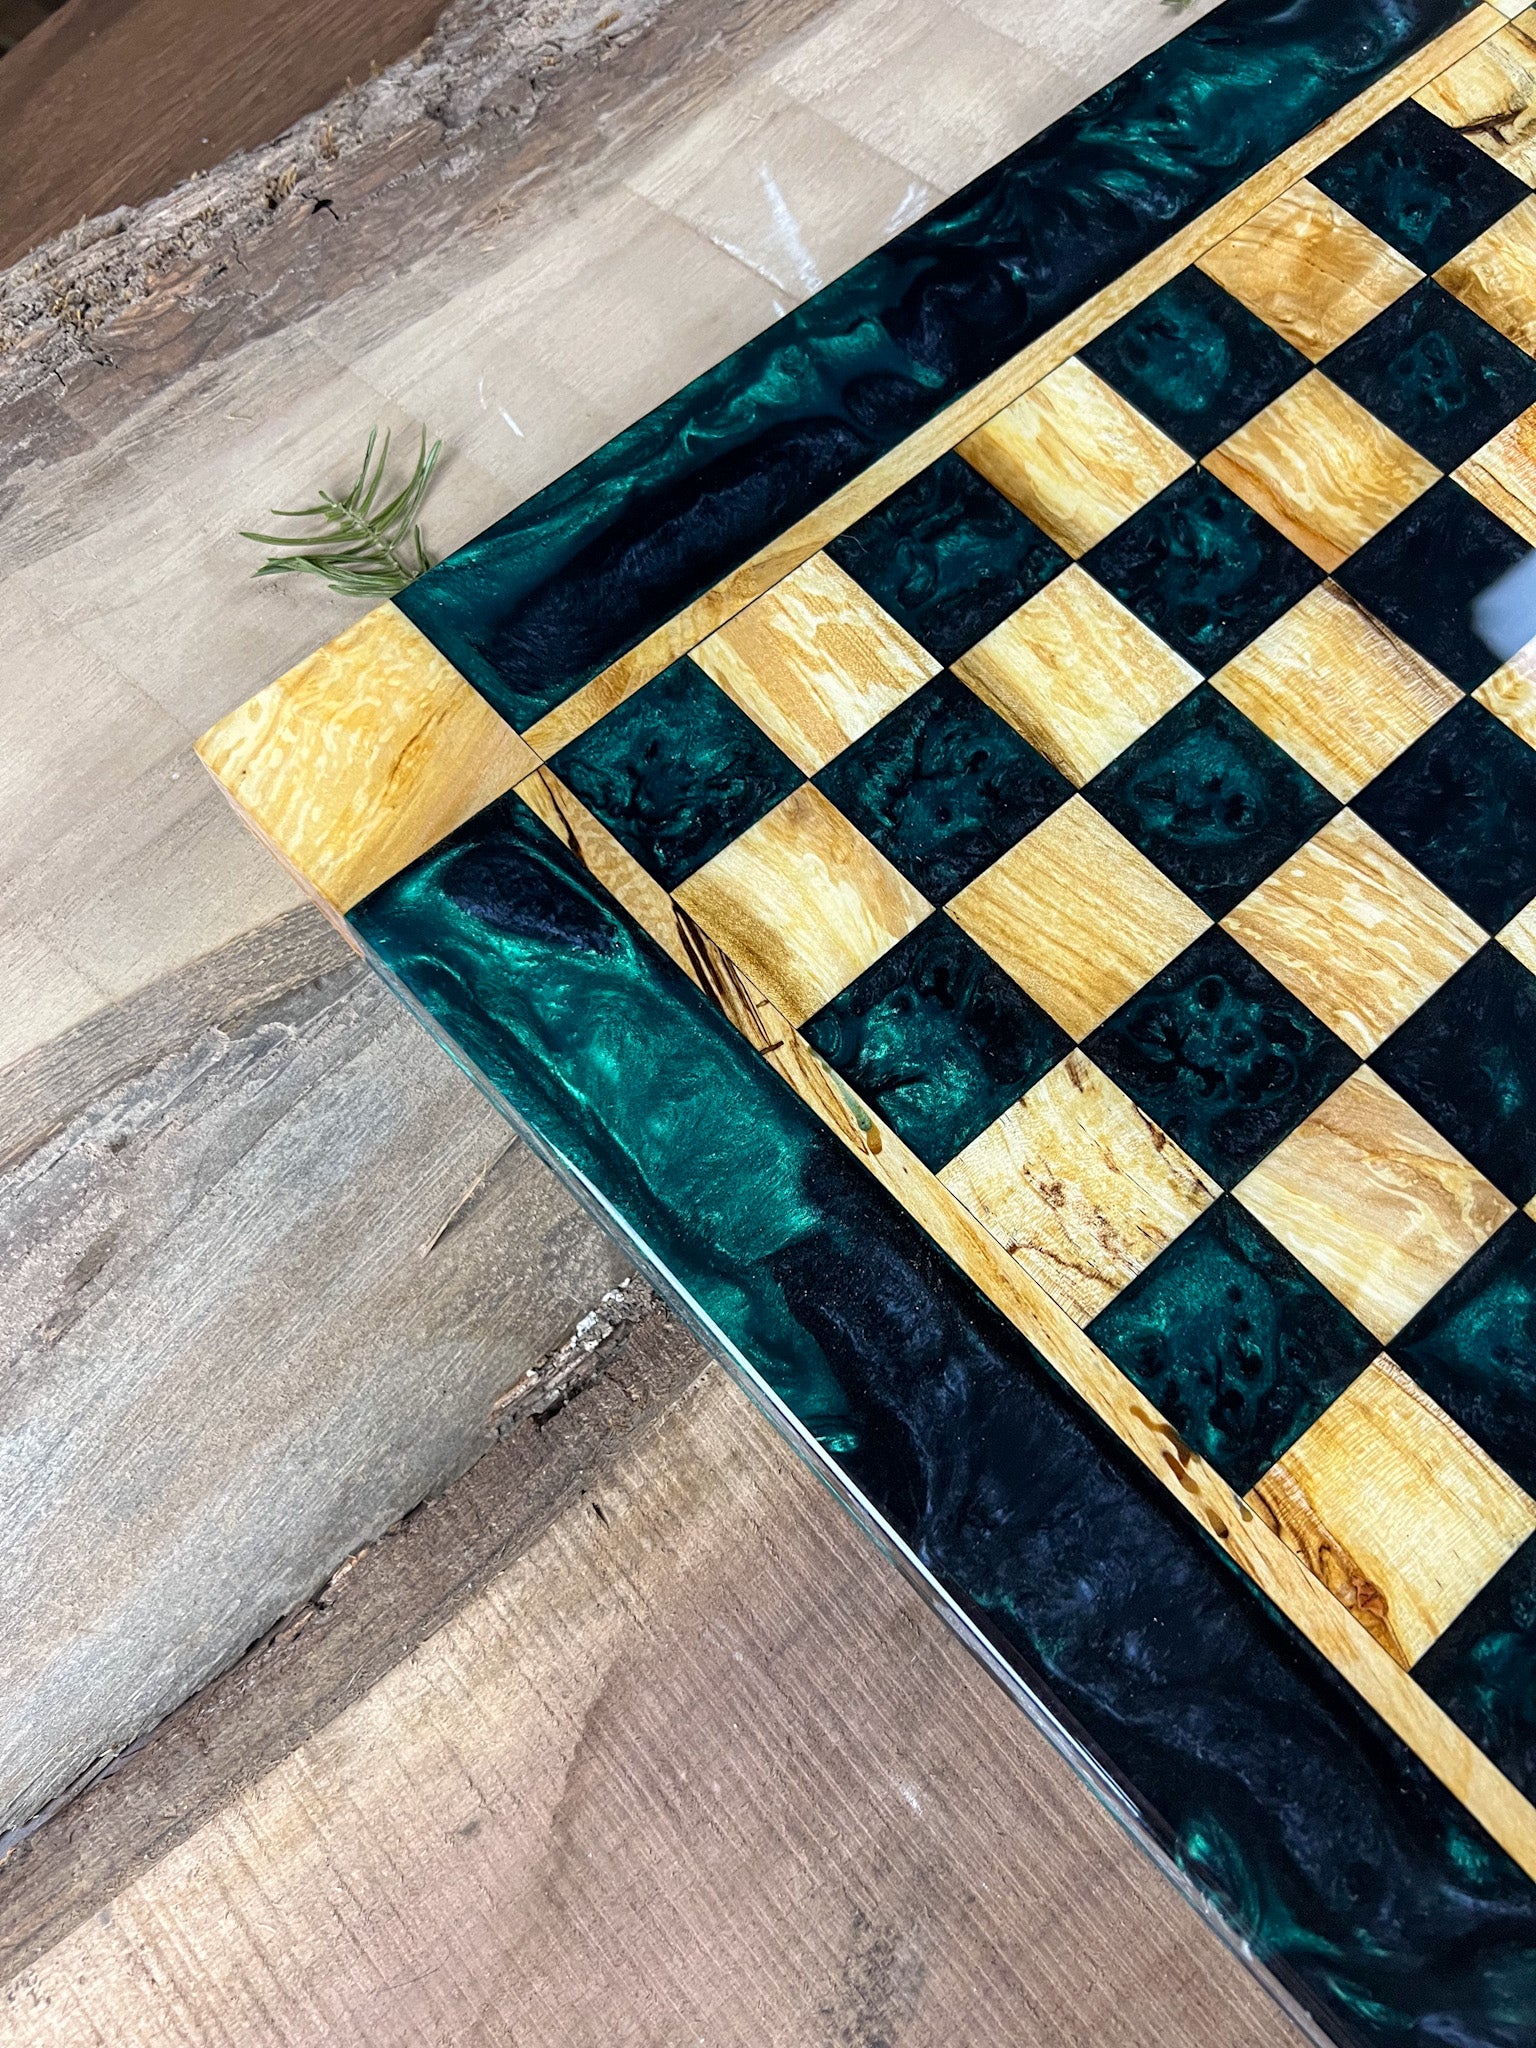 Emerald Black Onyx Maple Wood Chess Board (With Border)